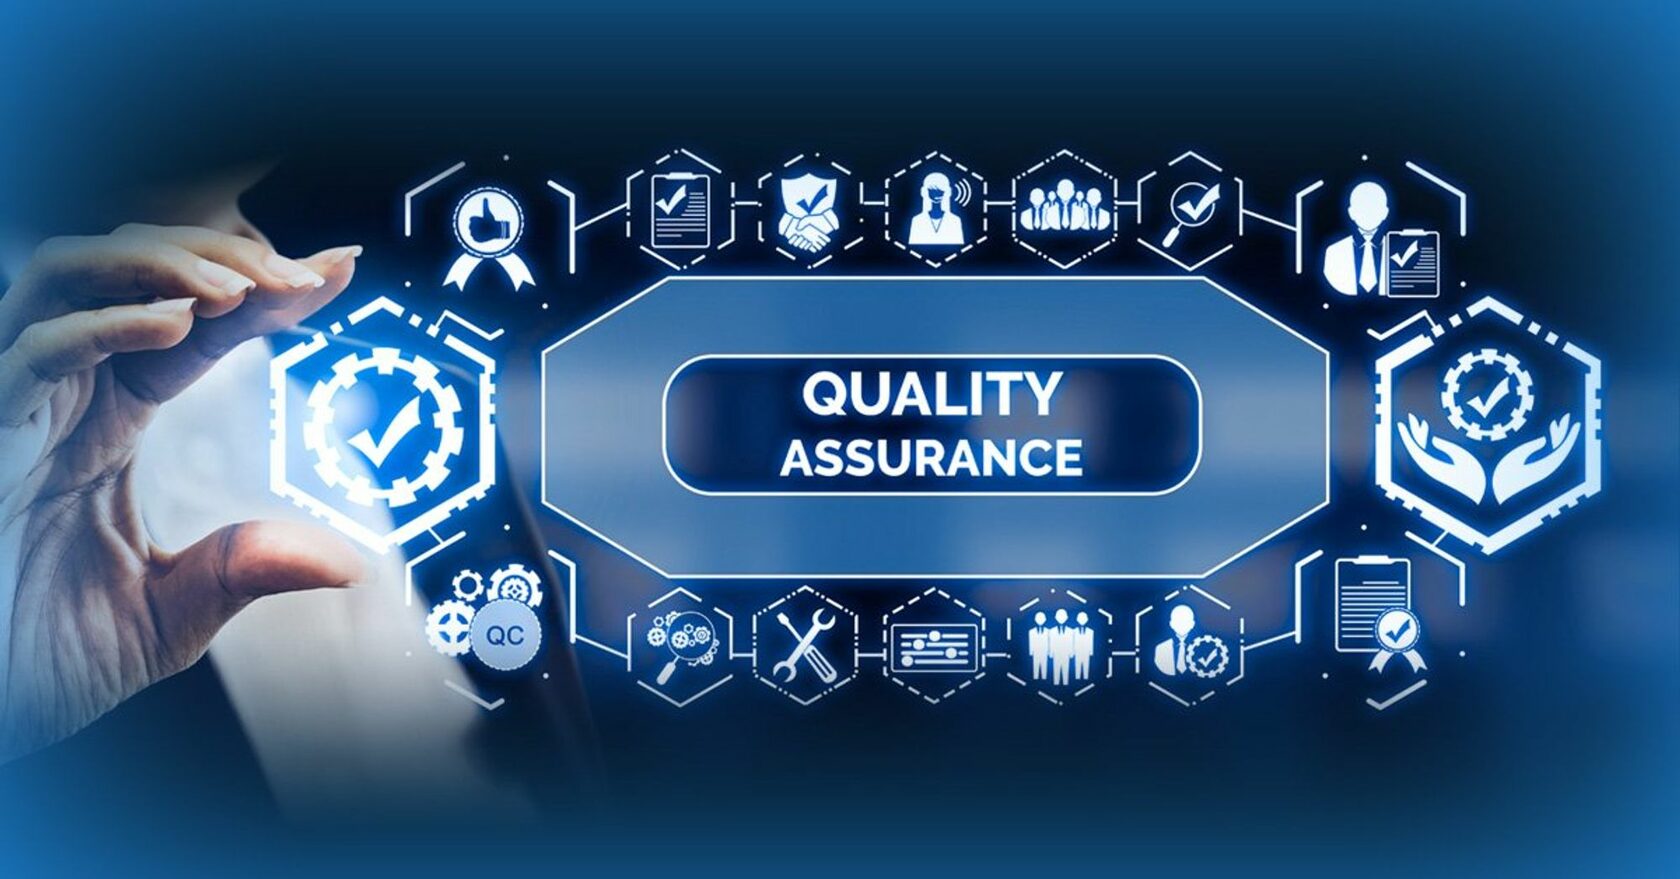 Quality Assurance and Price Guarantee